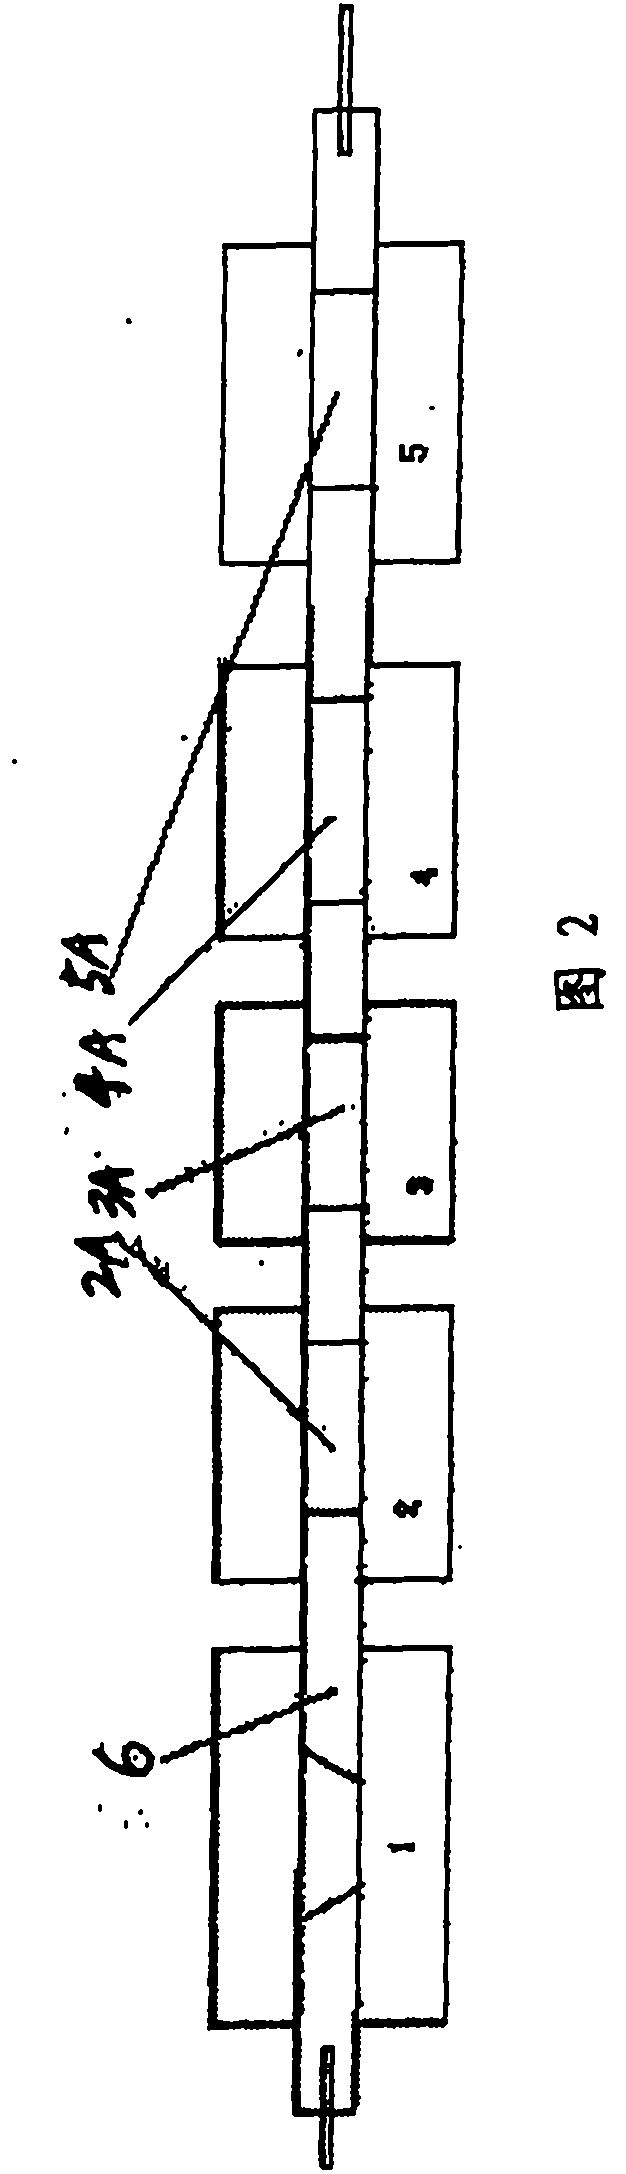 Method for recovering and processing discarded fluorescent lamp